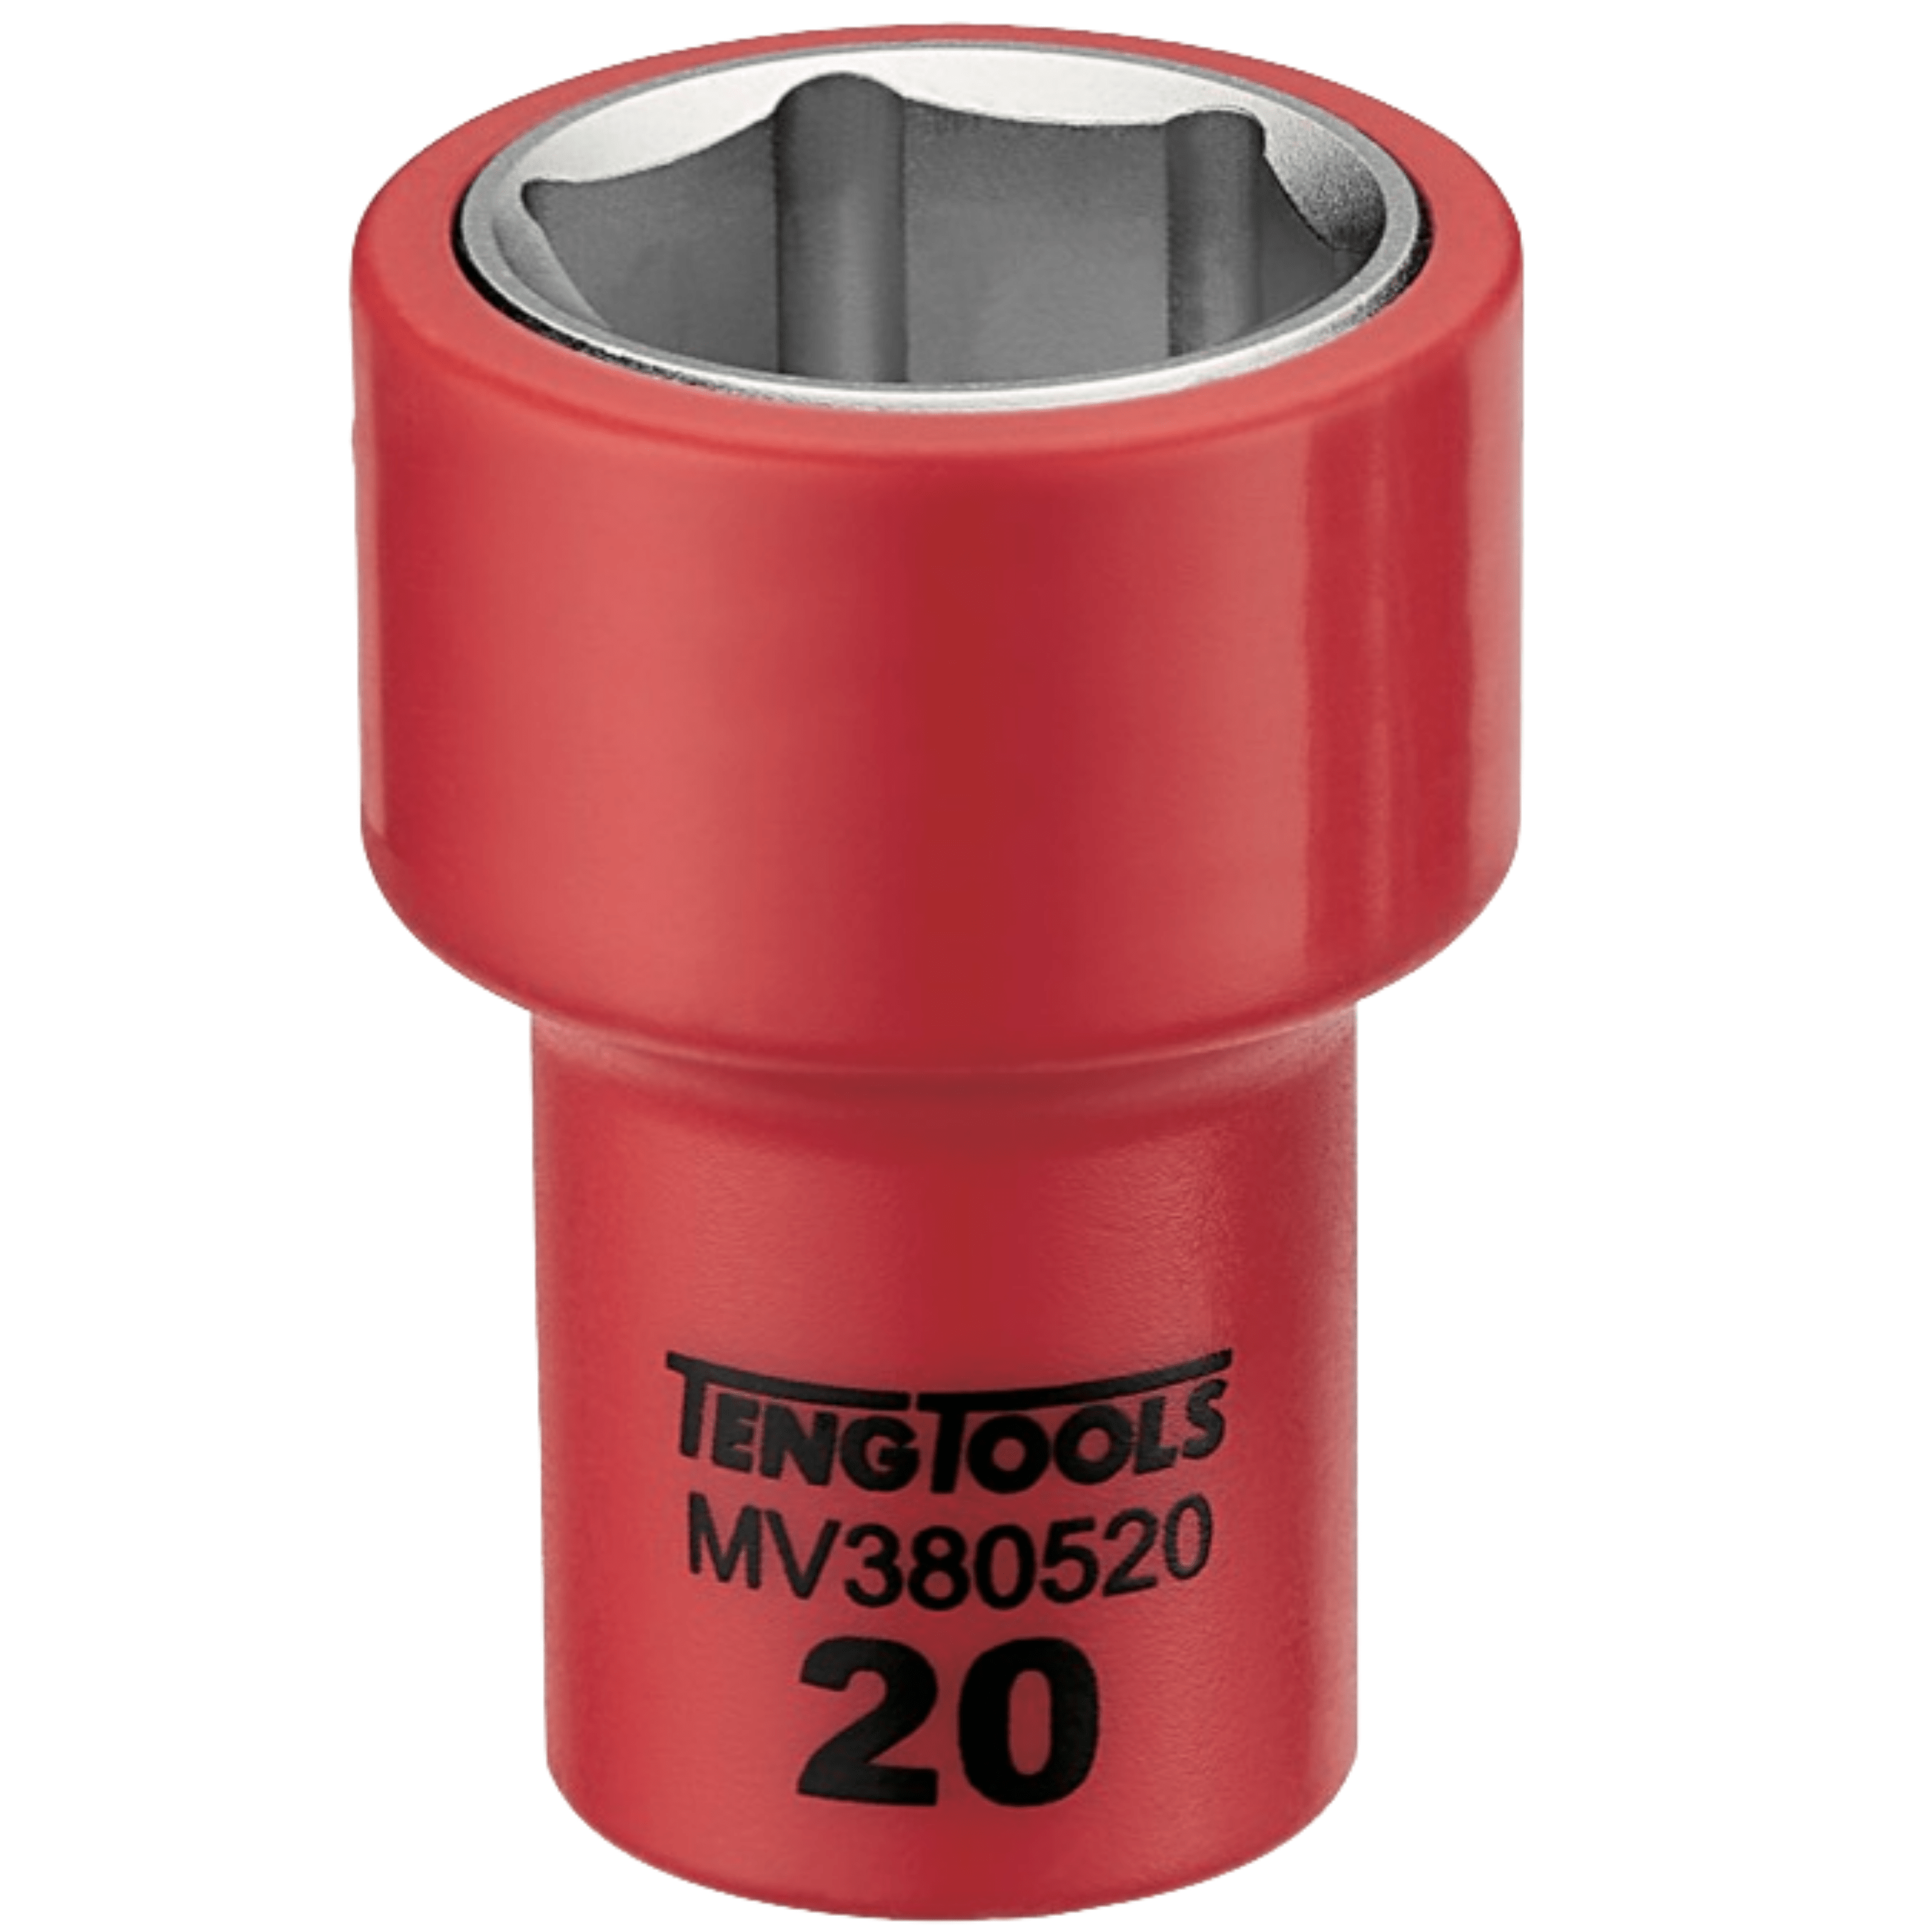 Teng Tools 3/8 Inch Drive Metric 6 Point 1000 Volt Shallow Insulated Sockets - 9mm